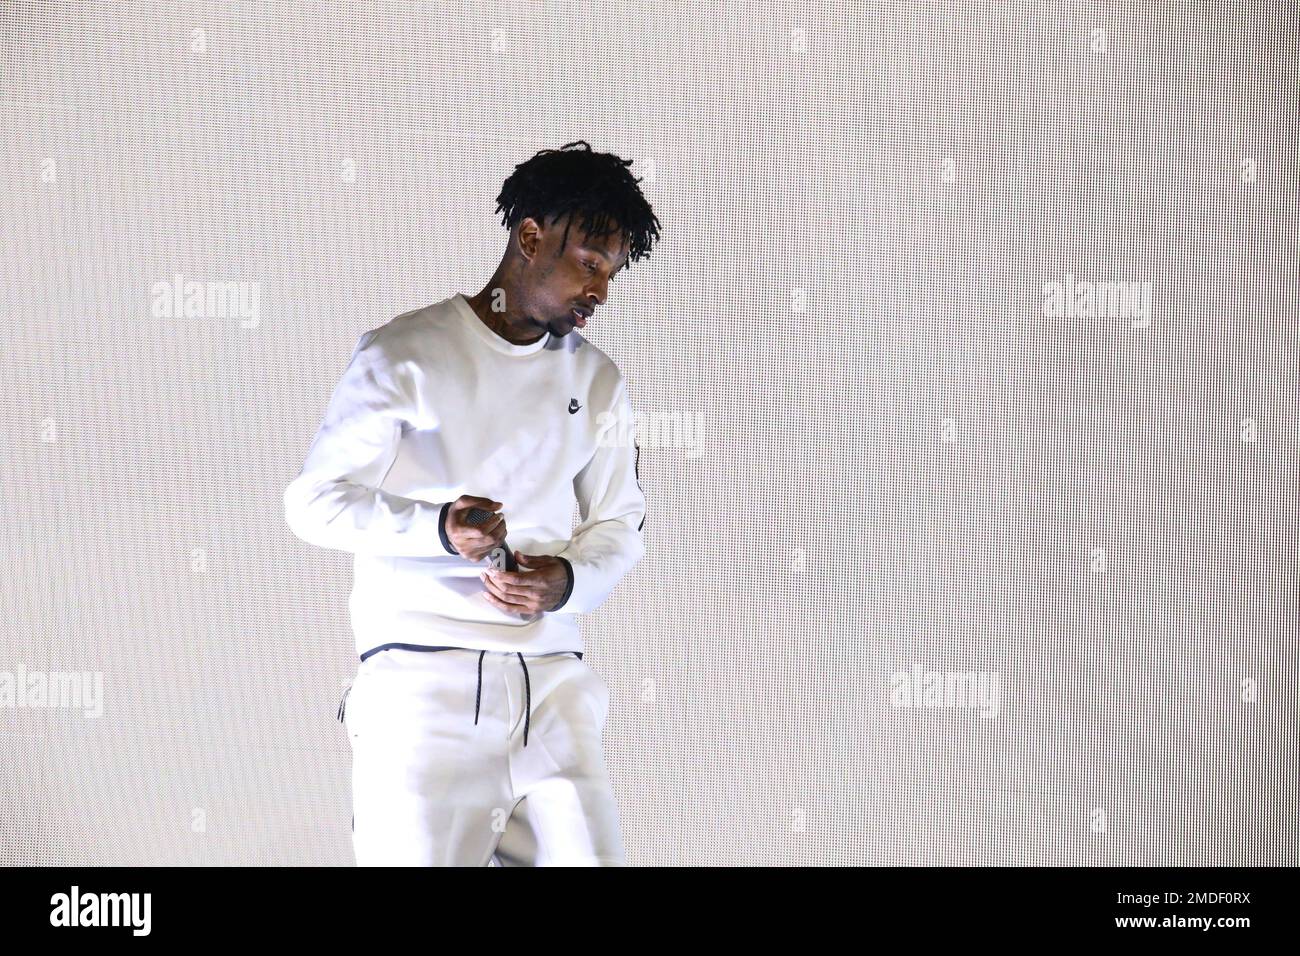 Musician 21 Savage performs at the 2021 Governors Ball music festival at  Citi Field on Sunday, Sept. 26, 2021, in New York. (Photo by Andy  Kropa/Invision/AP Stock Photo - Alamy